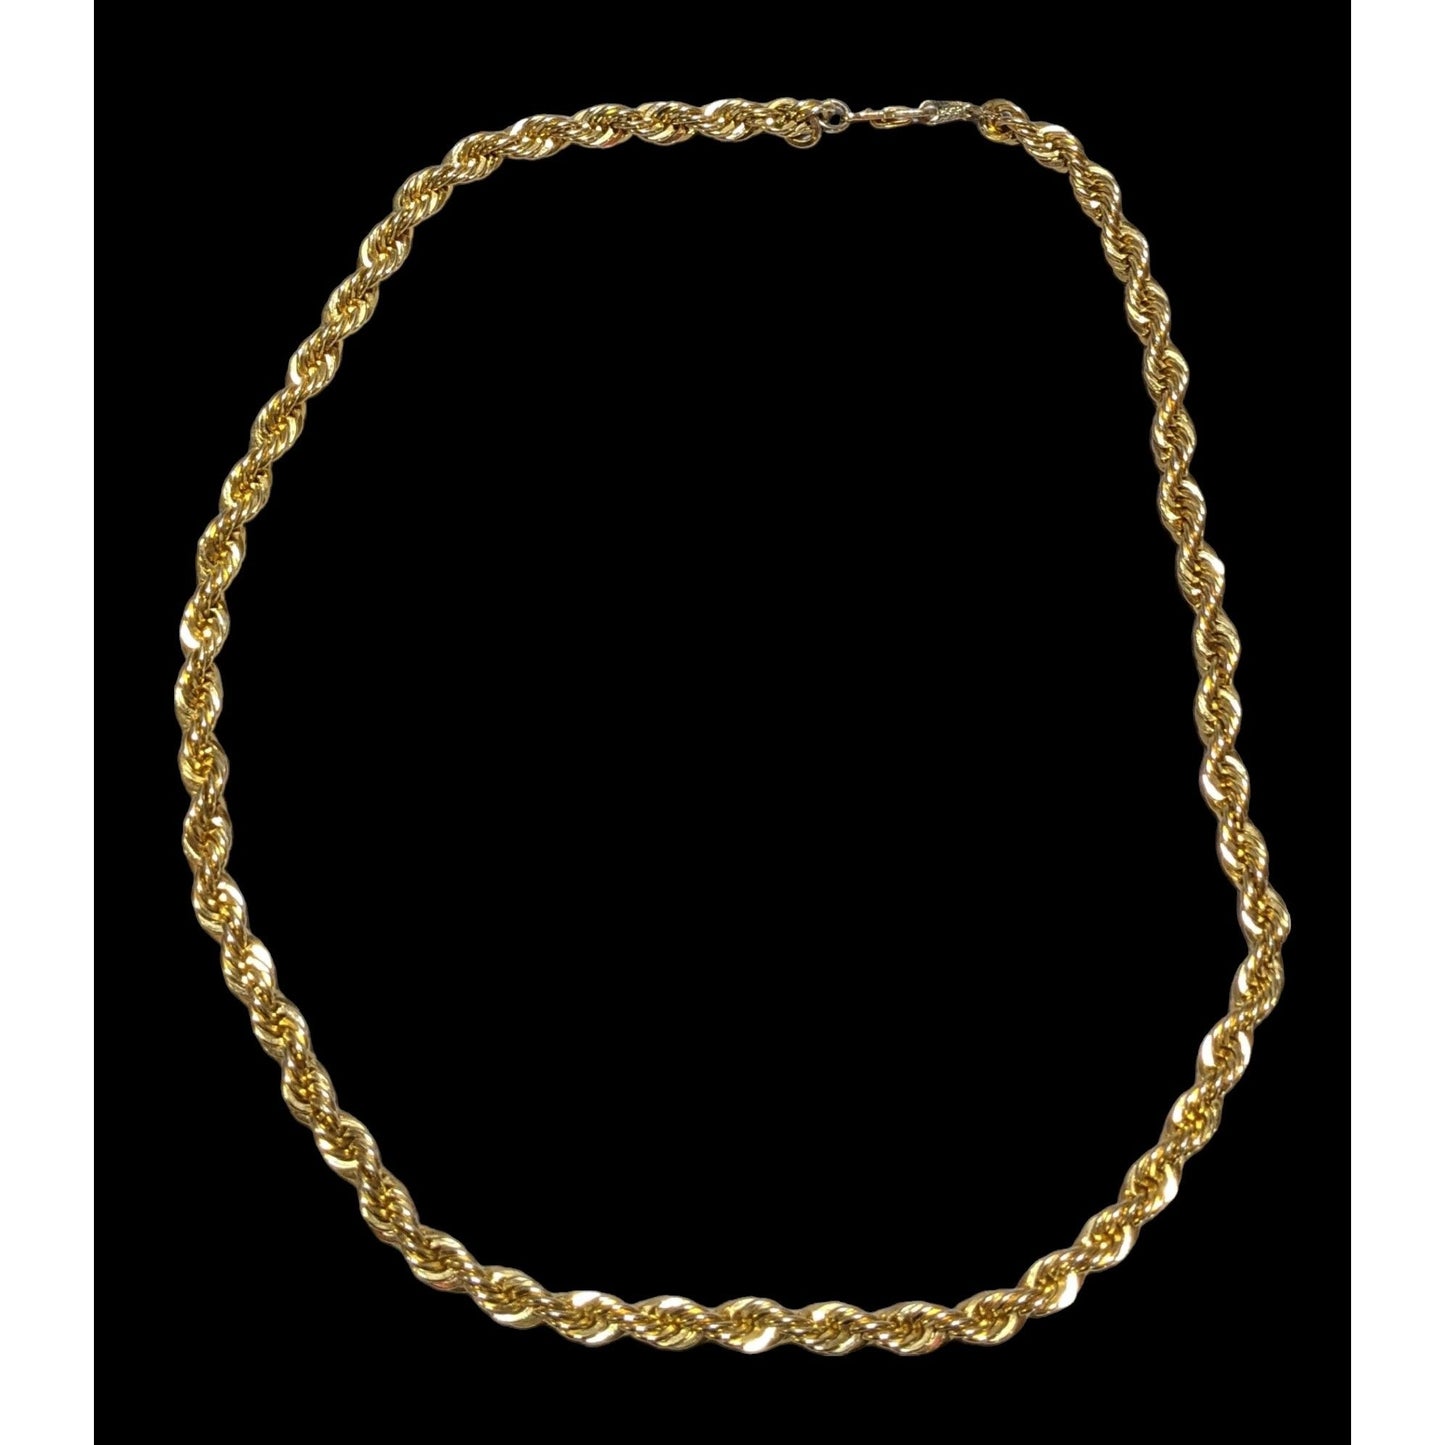 24K Gold Plated Rope Chain Necklace